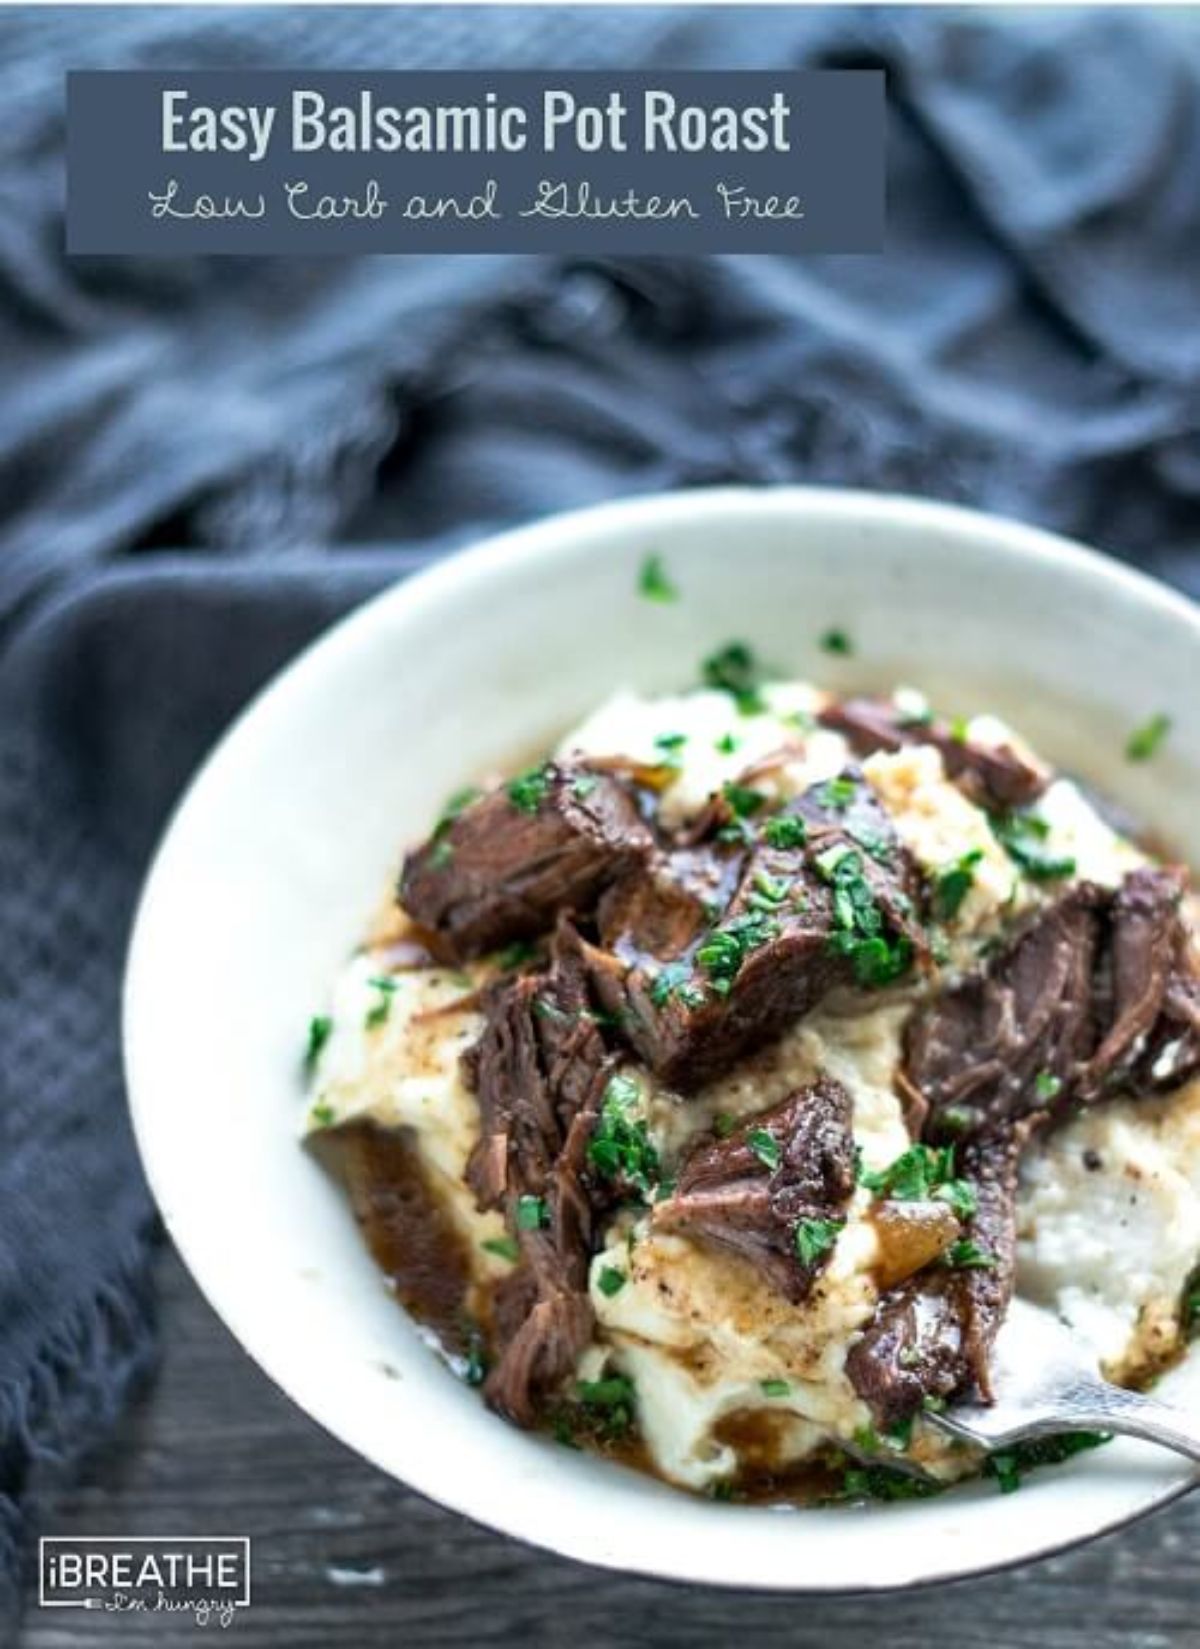 The text reads "Easy Balsami Pot Roast. Low Carb and Gluten free" On a dark gray cloth is a white bowl filled with beef stew, with soured cream and chopped herbs on top.